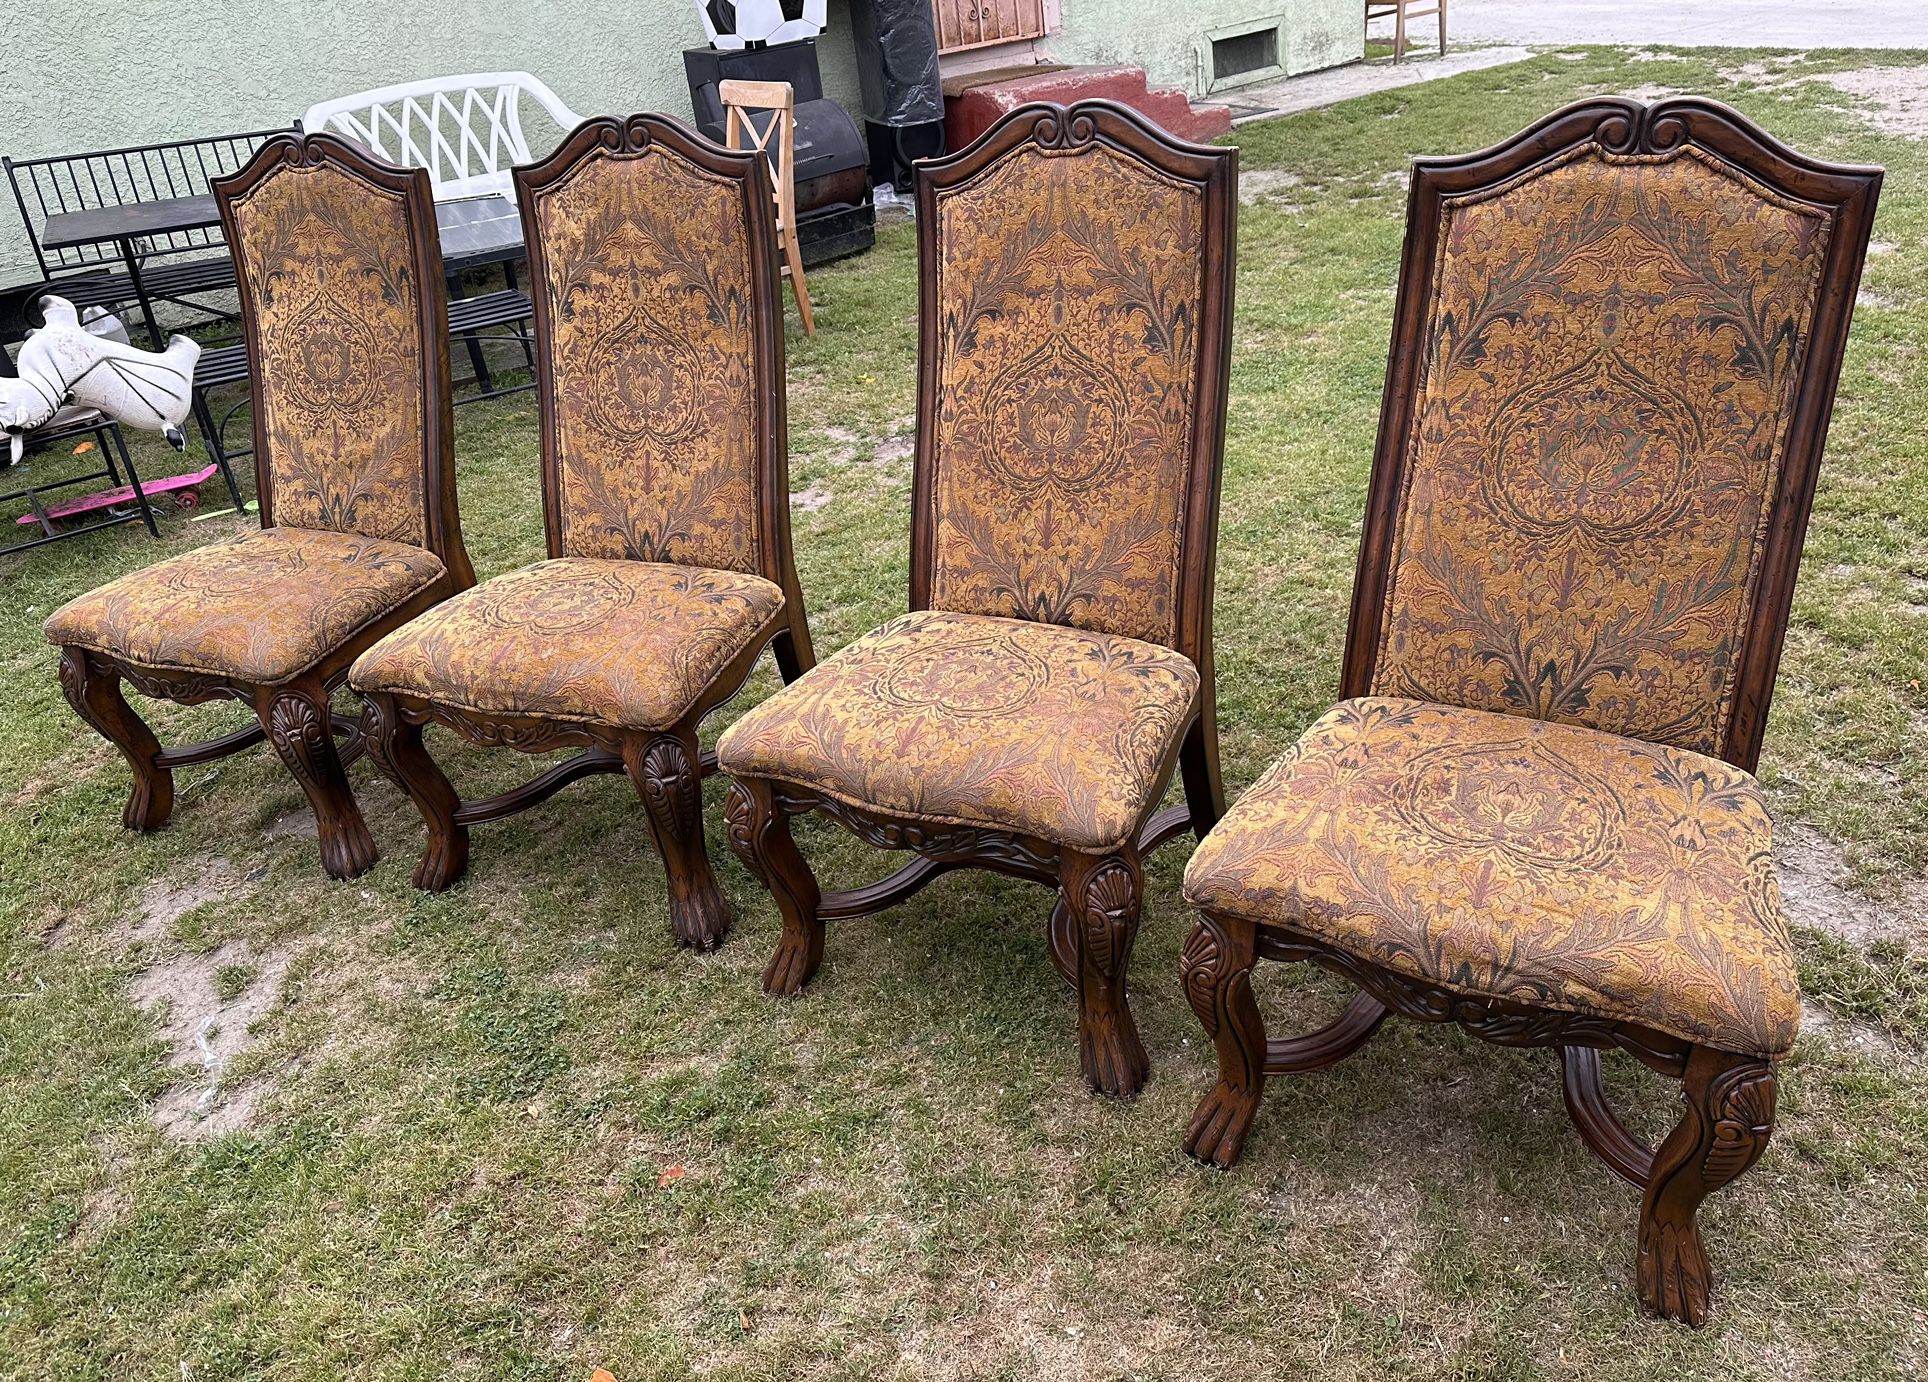 Vintage Chairs, Antique Chairs 